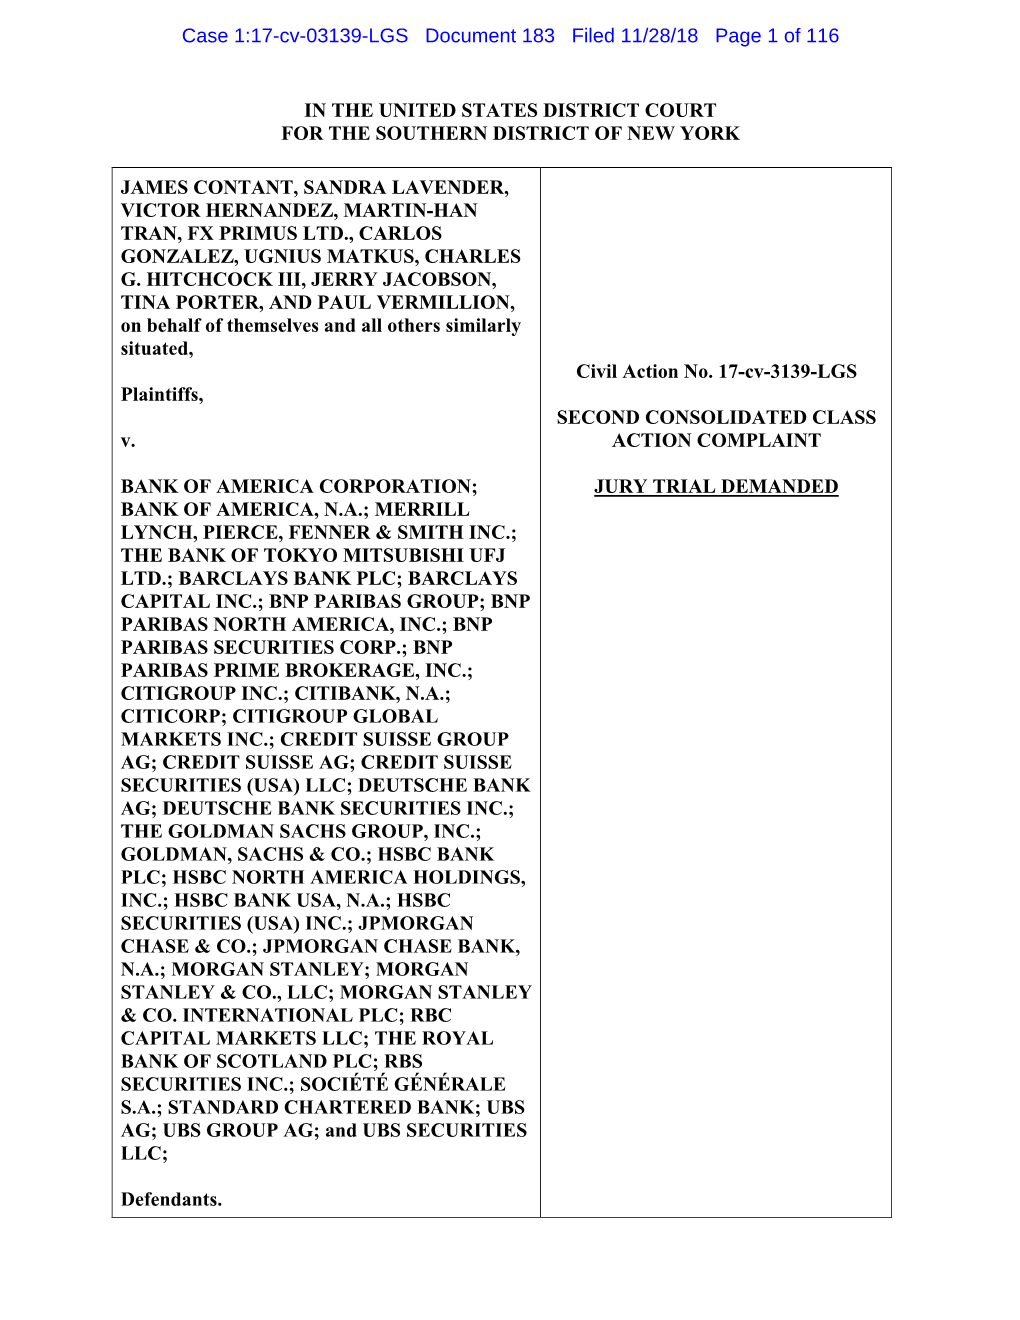 Second Consolidated Class Action Complaint